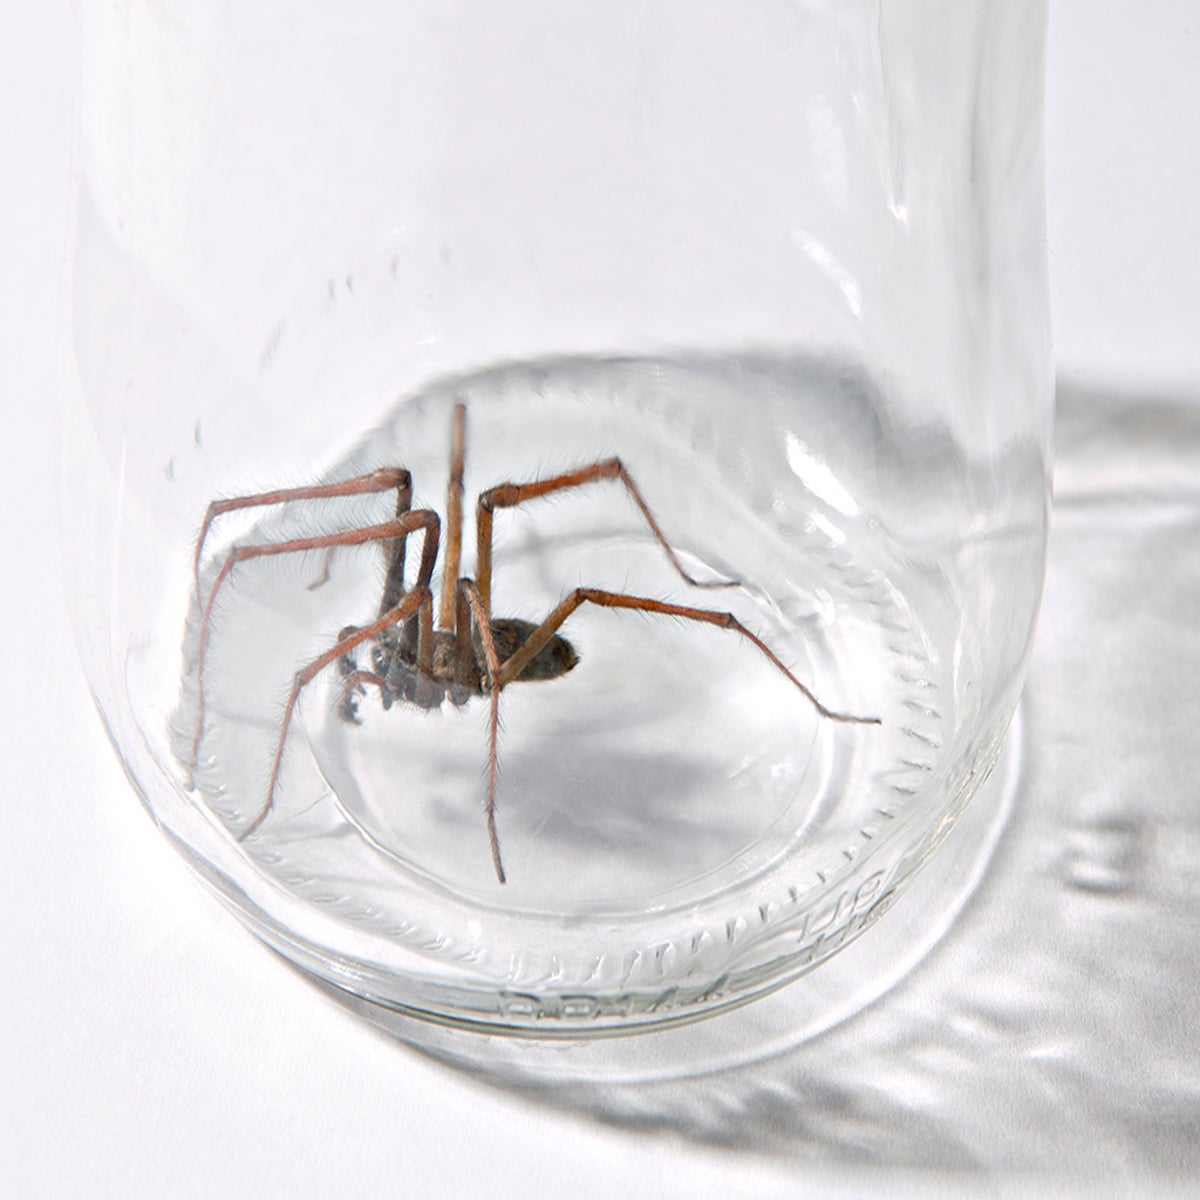 Spiders Are so Scary That They Actually Scare Other Spiders, Scientists Find